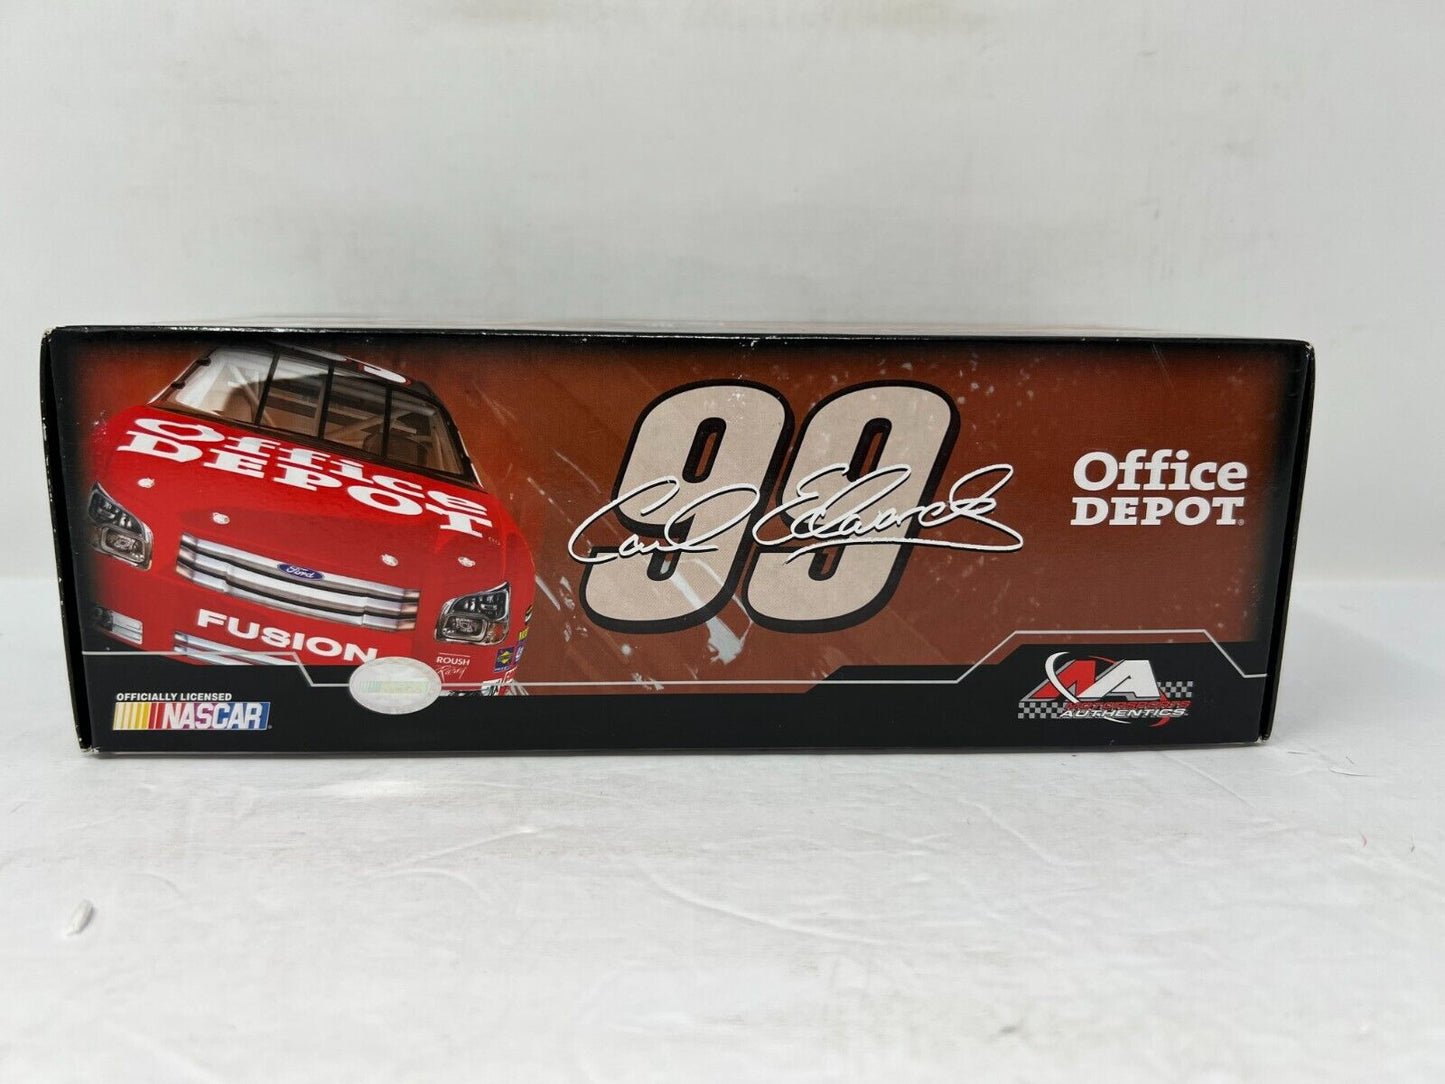 Motorsports Authentics #99 Carl Edwards Office Depot Ford Fusion 1:24 Diecast